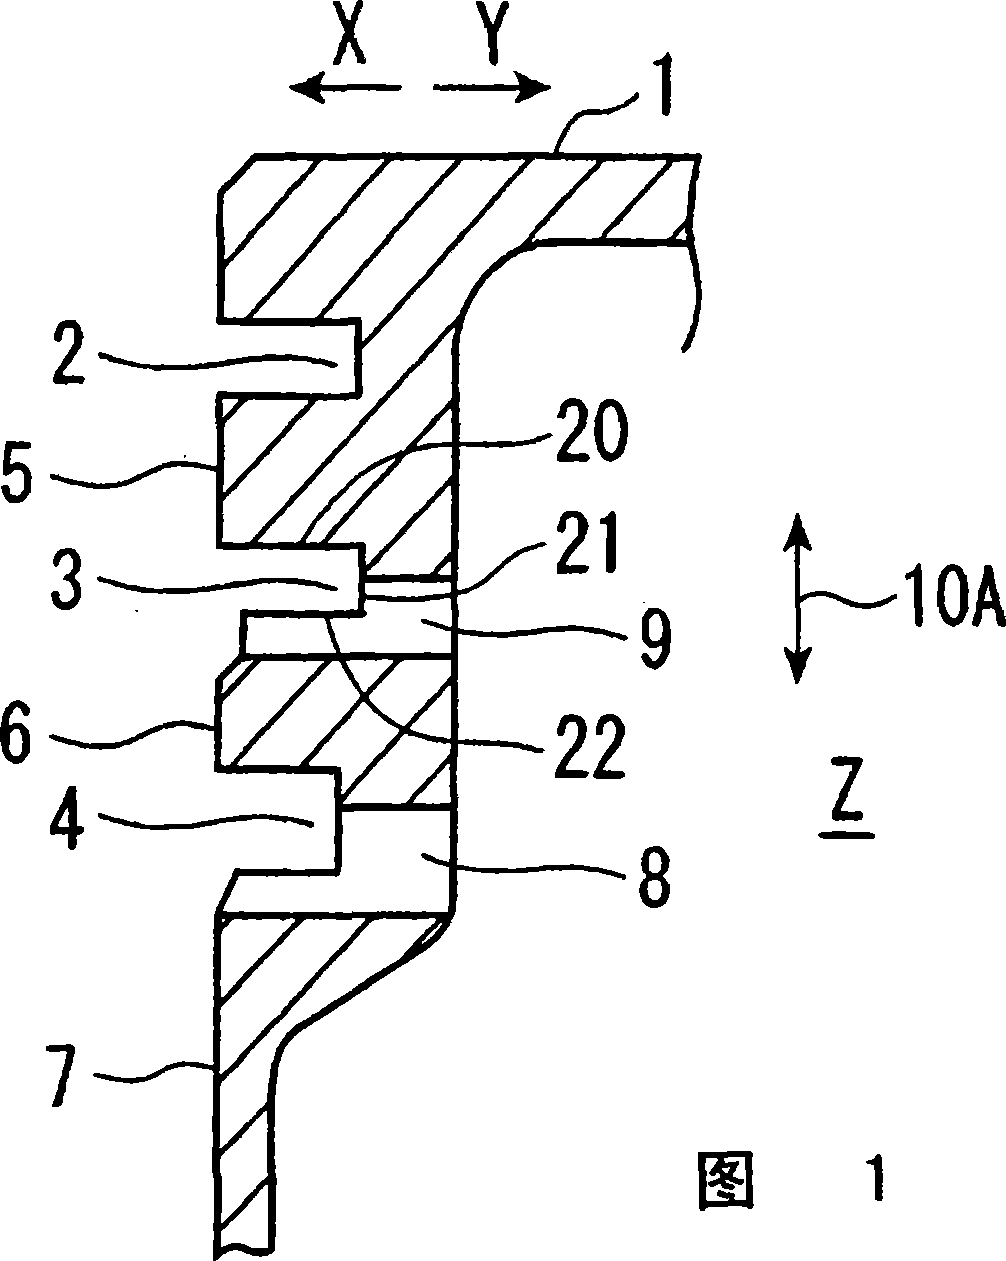 Piston for internal-combustion engine and combination of piston and piston ring for internal-combustion engine